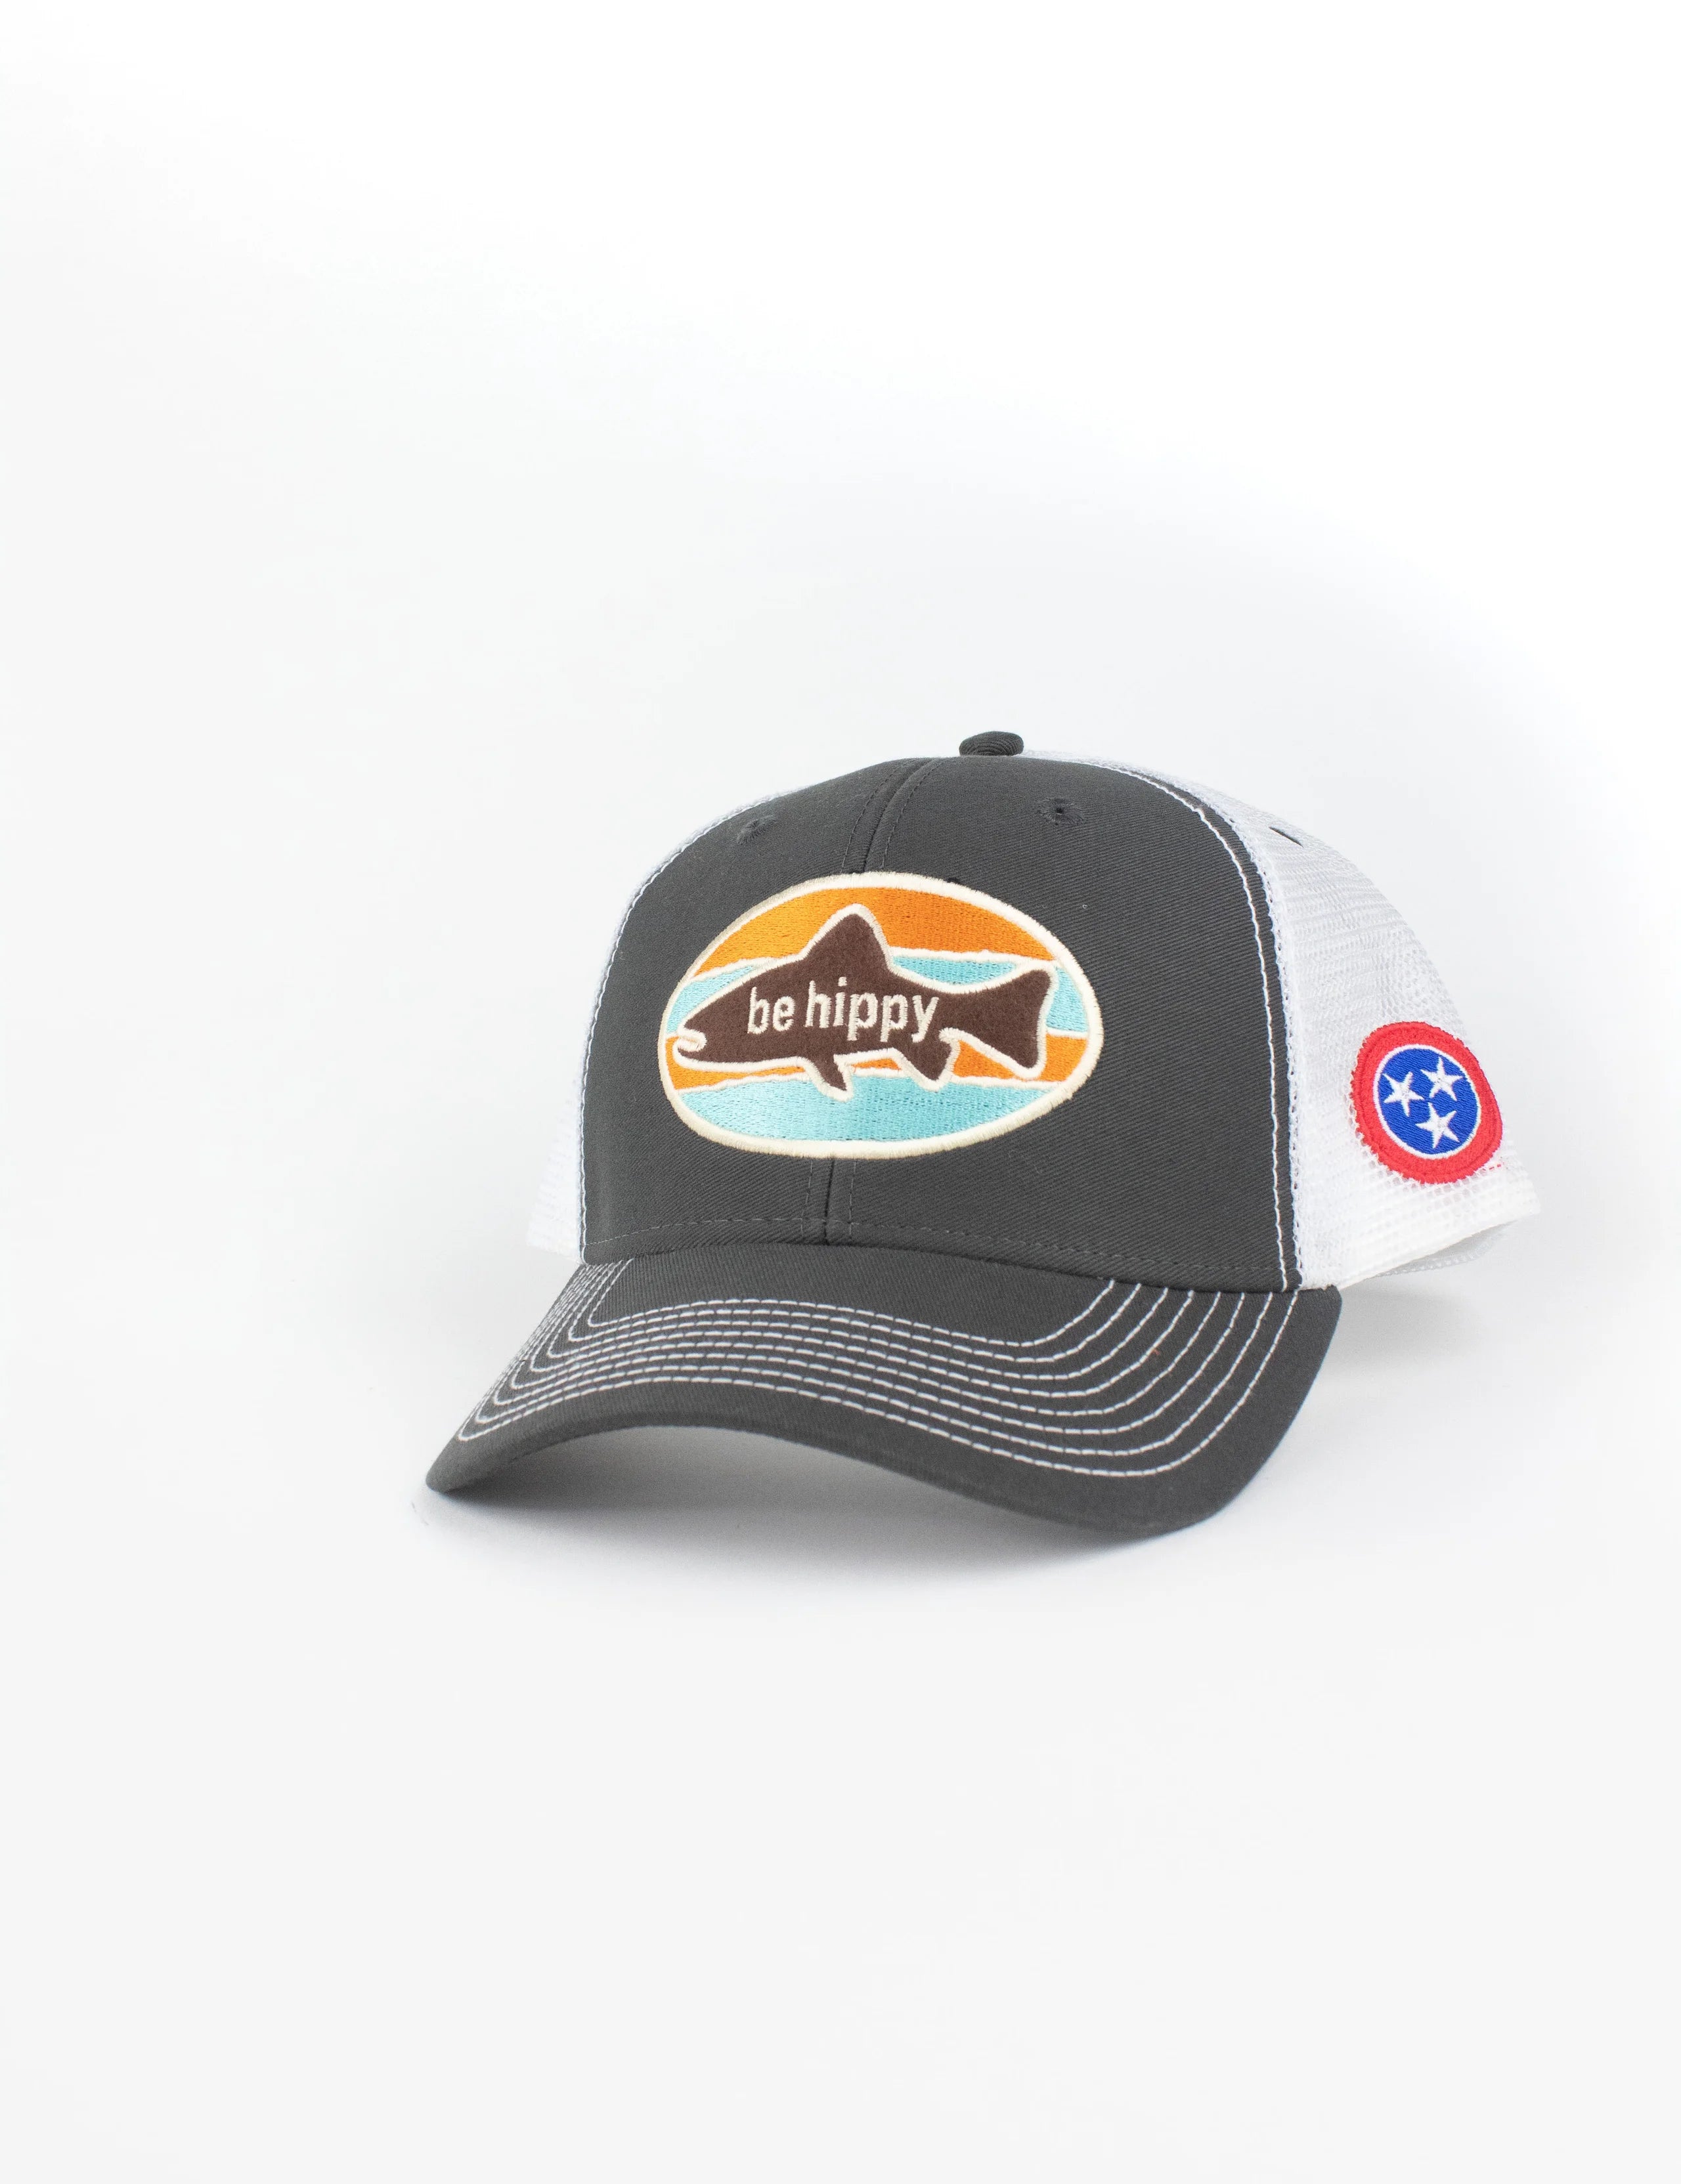 Be Hippy Fish Logo Trucker Hat - Tennessee Flag Gray with White Mesh